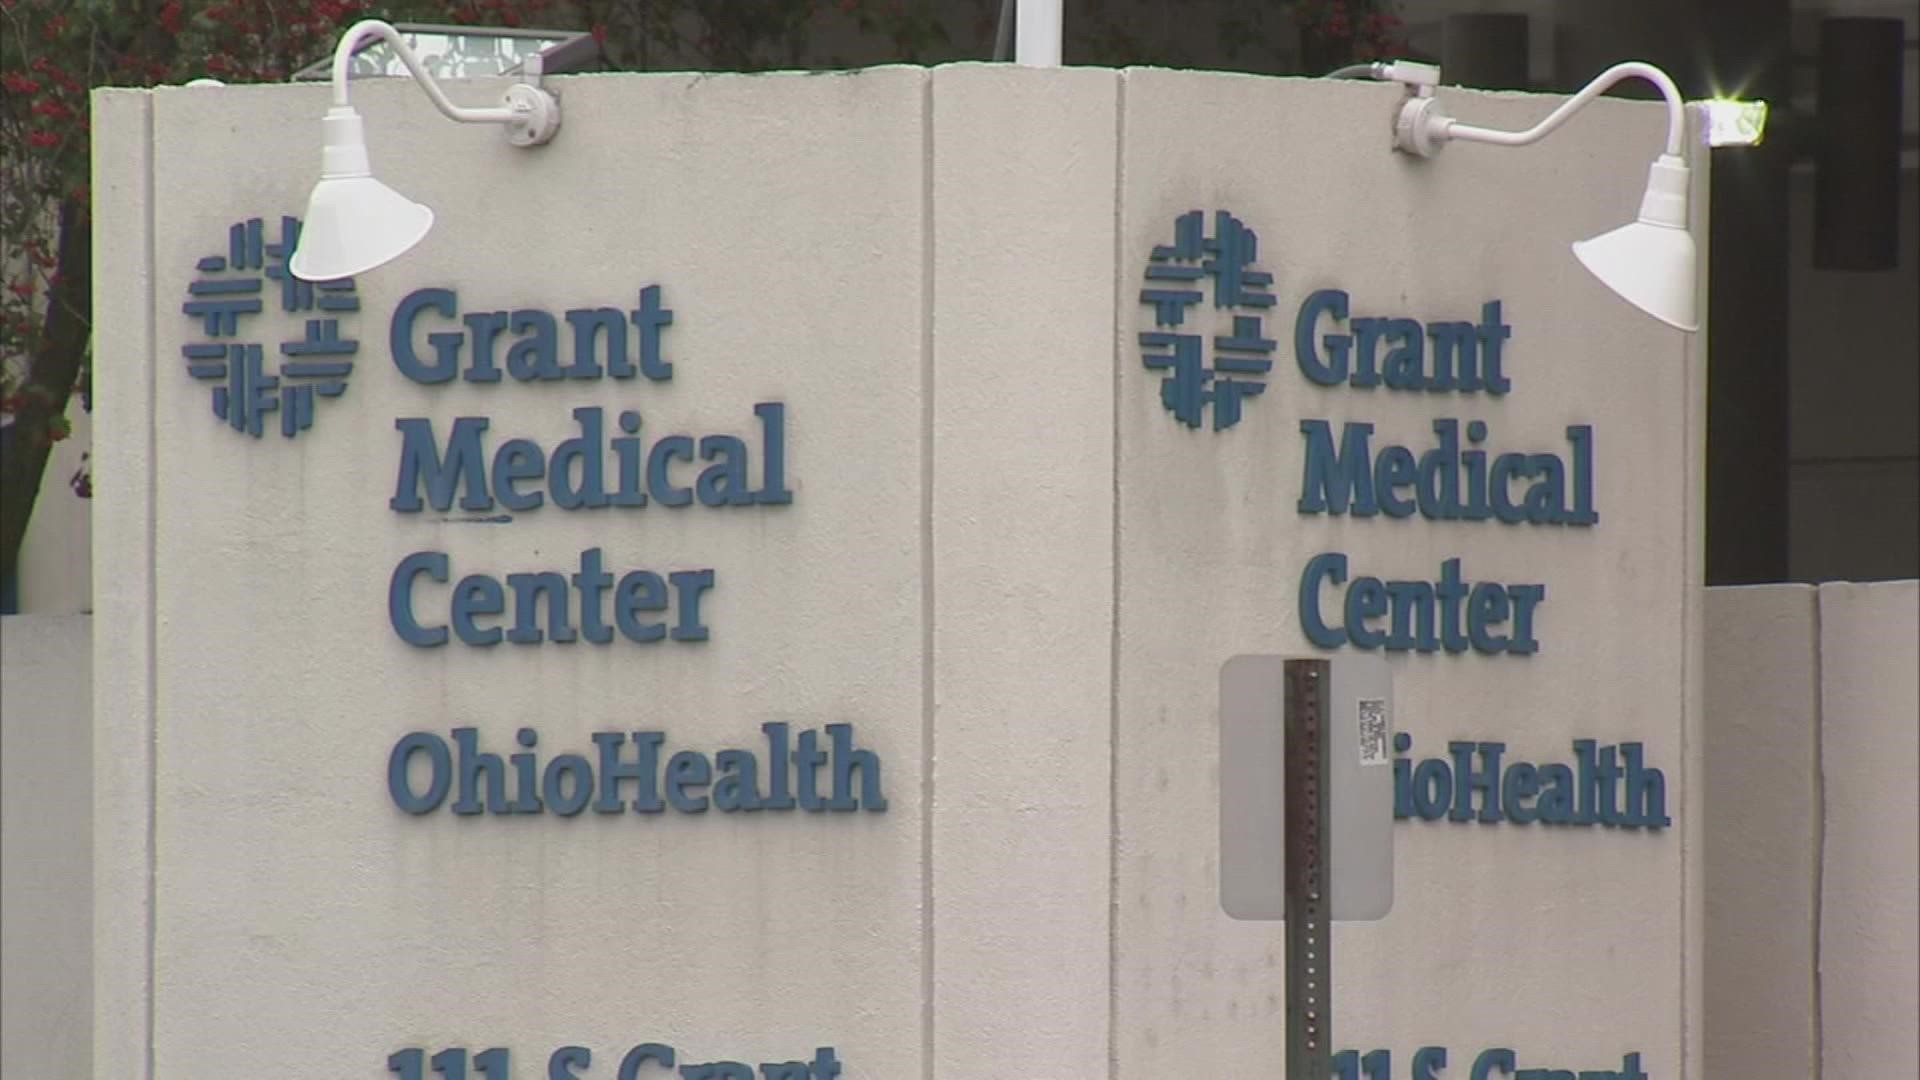 According to an OhioHealth spokesperson, this status means the workflow in the emergency department has changed to increase the speed at which patients are triaged.